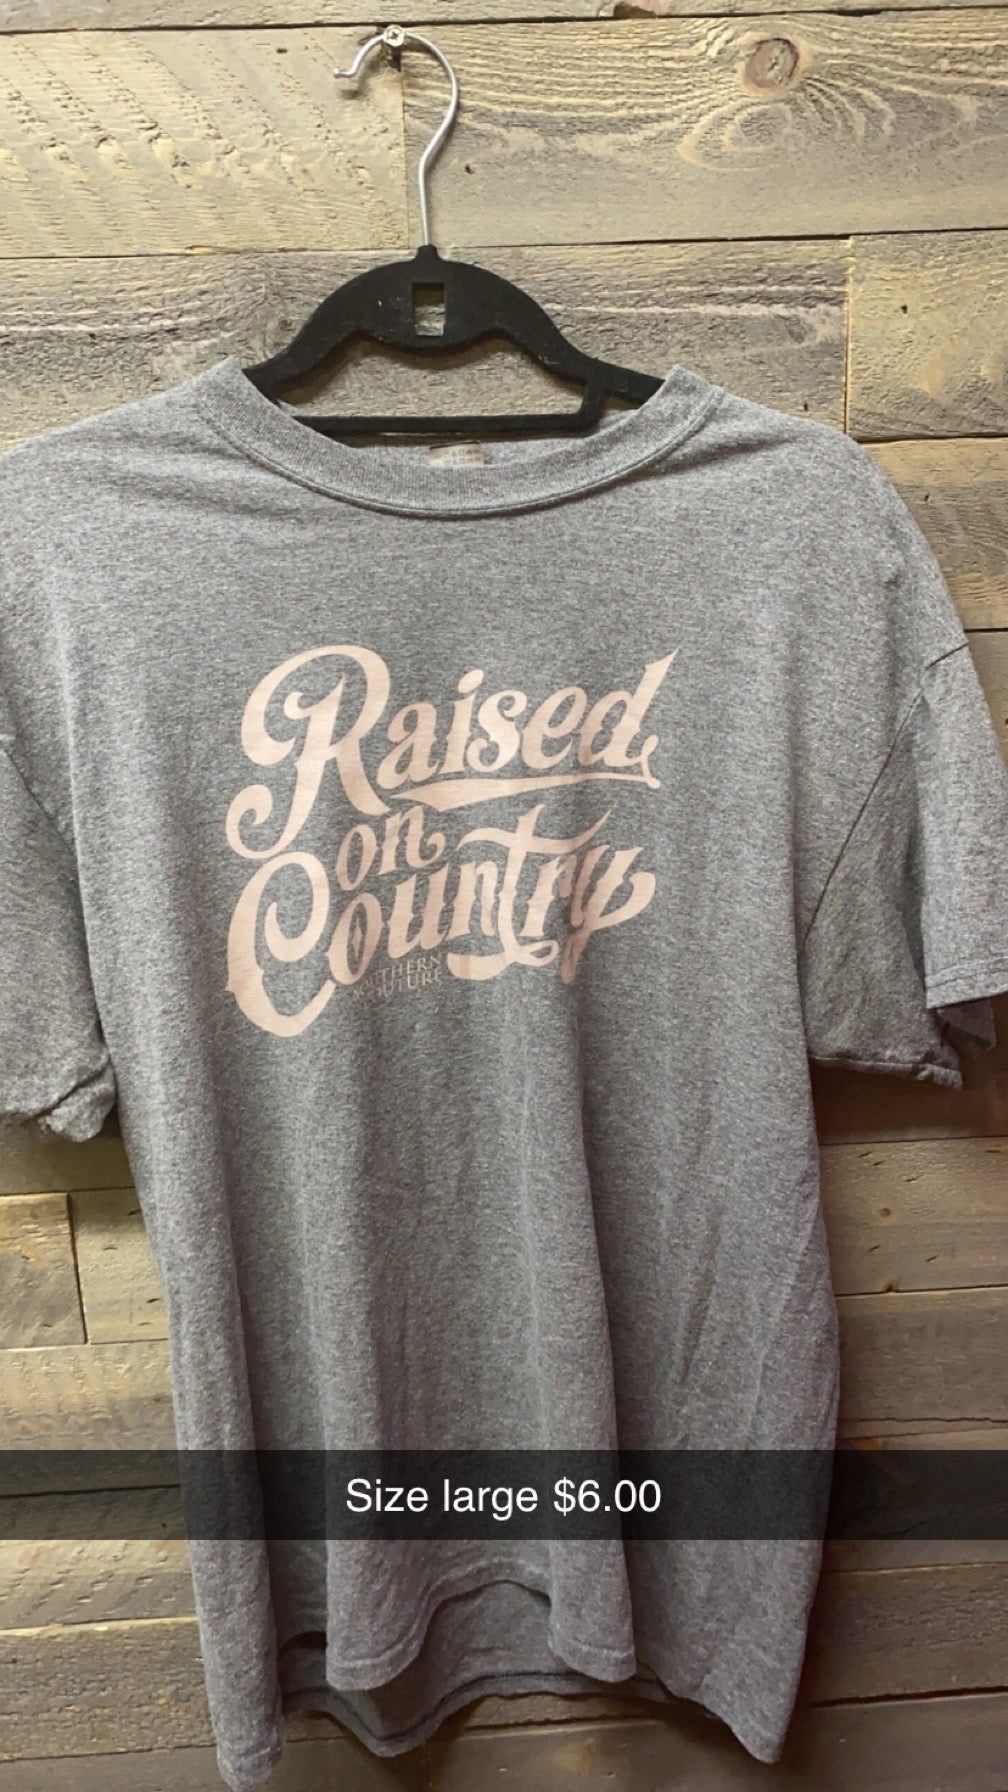 #156 raised on country large shirt